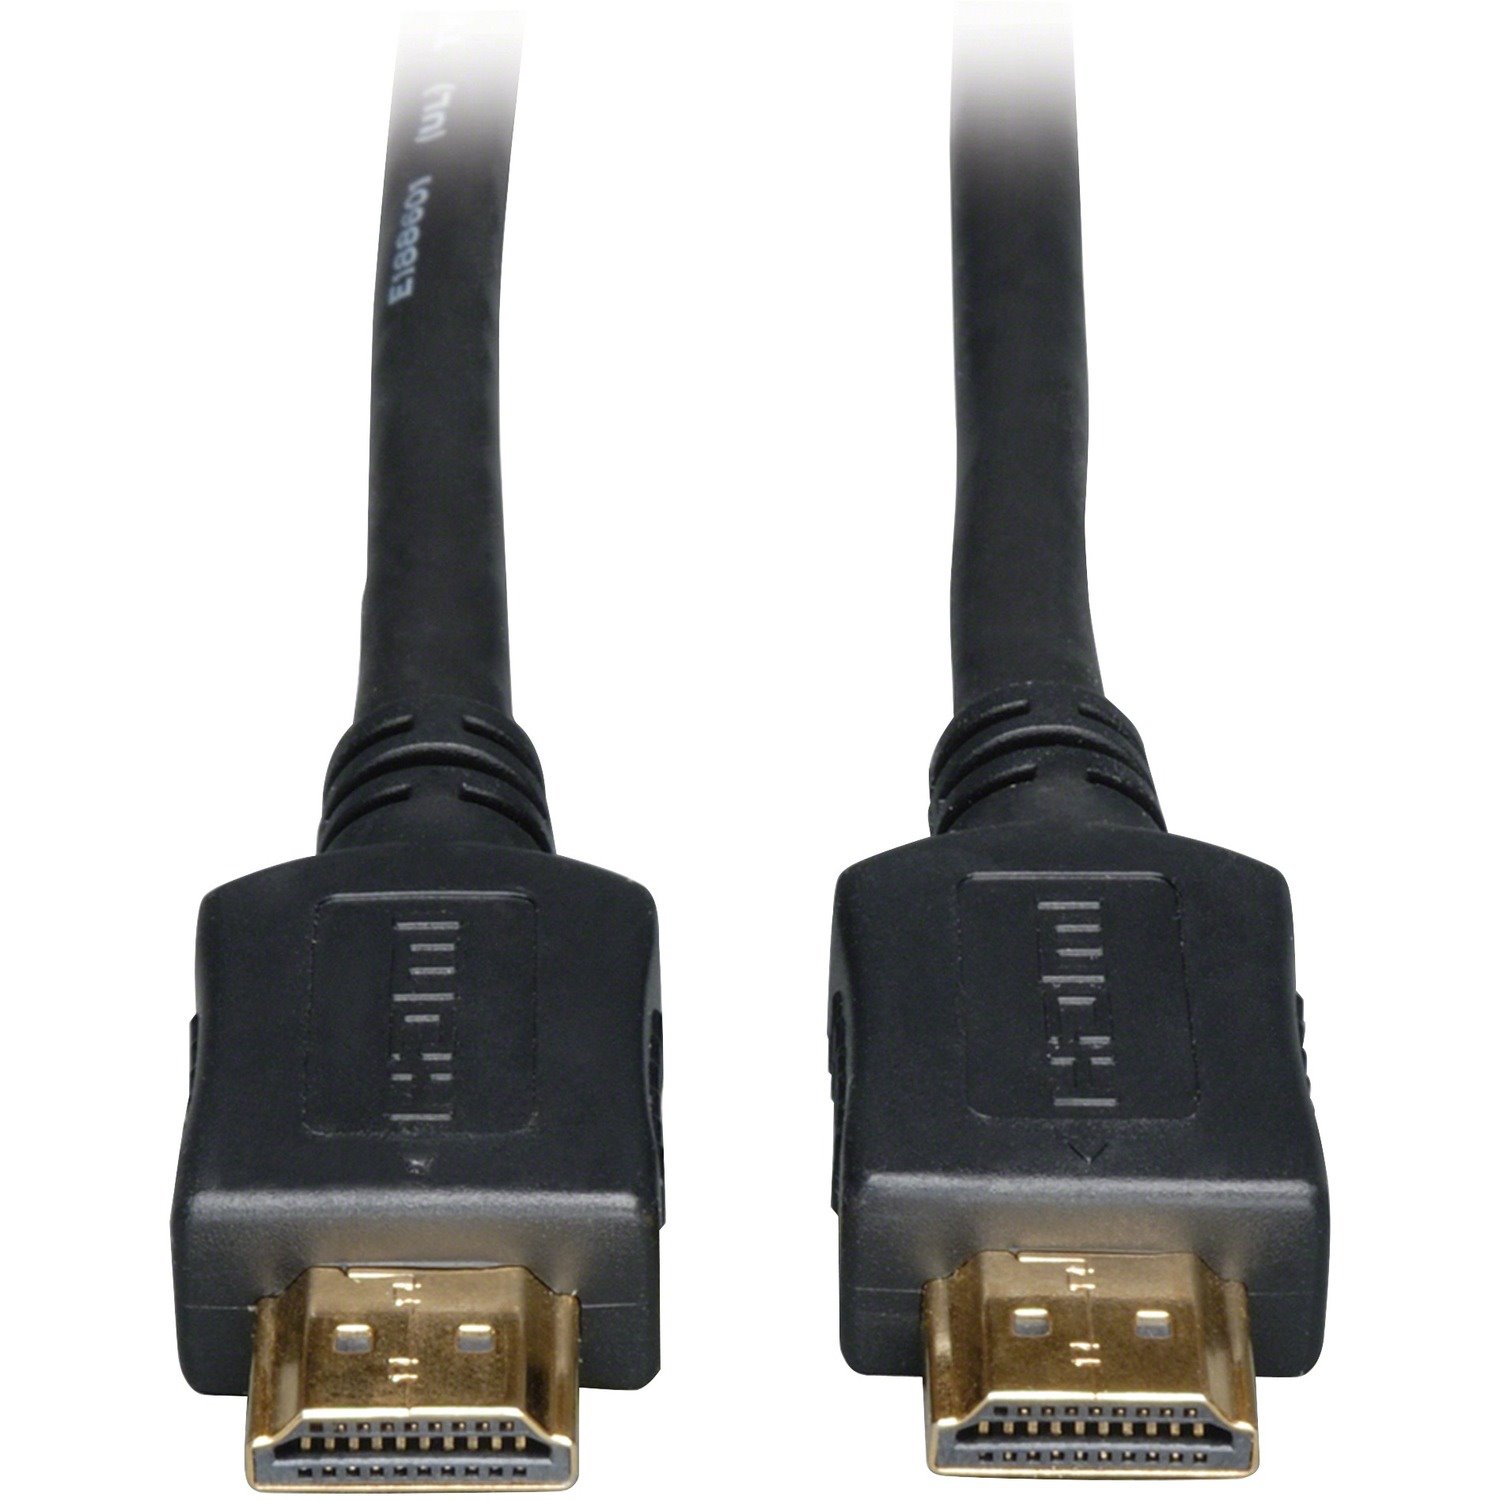 Eaton Tripp Lite Series High-Speed HDMI Cable, Digital Video with Audio (M/M), Black, 50 ft. (15.24 m)